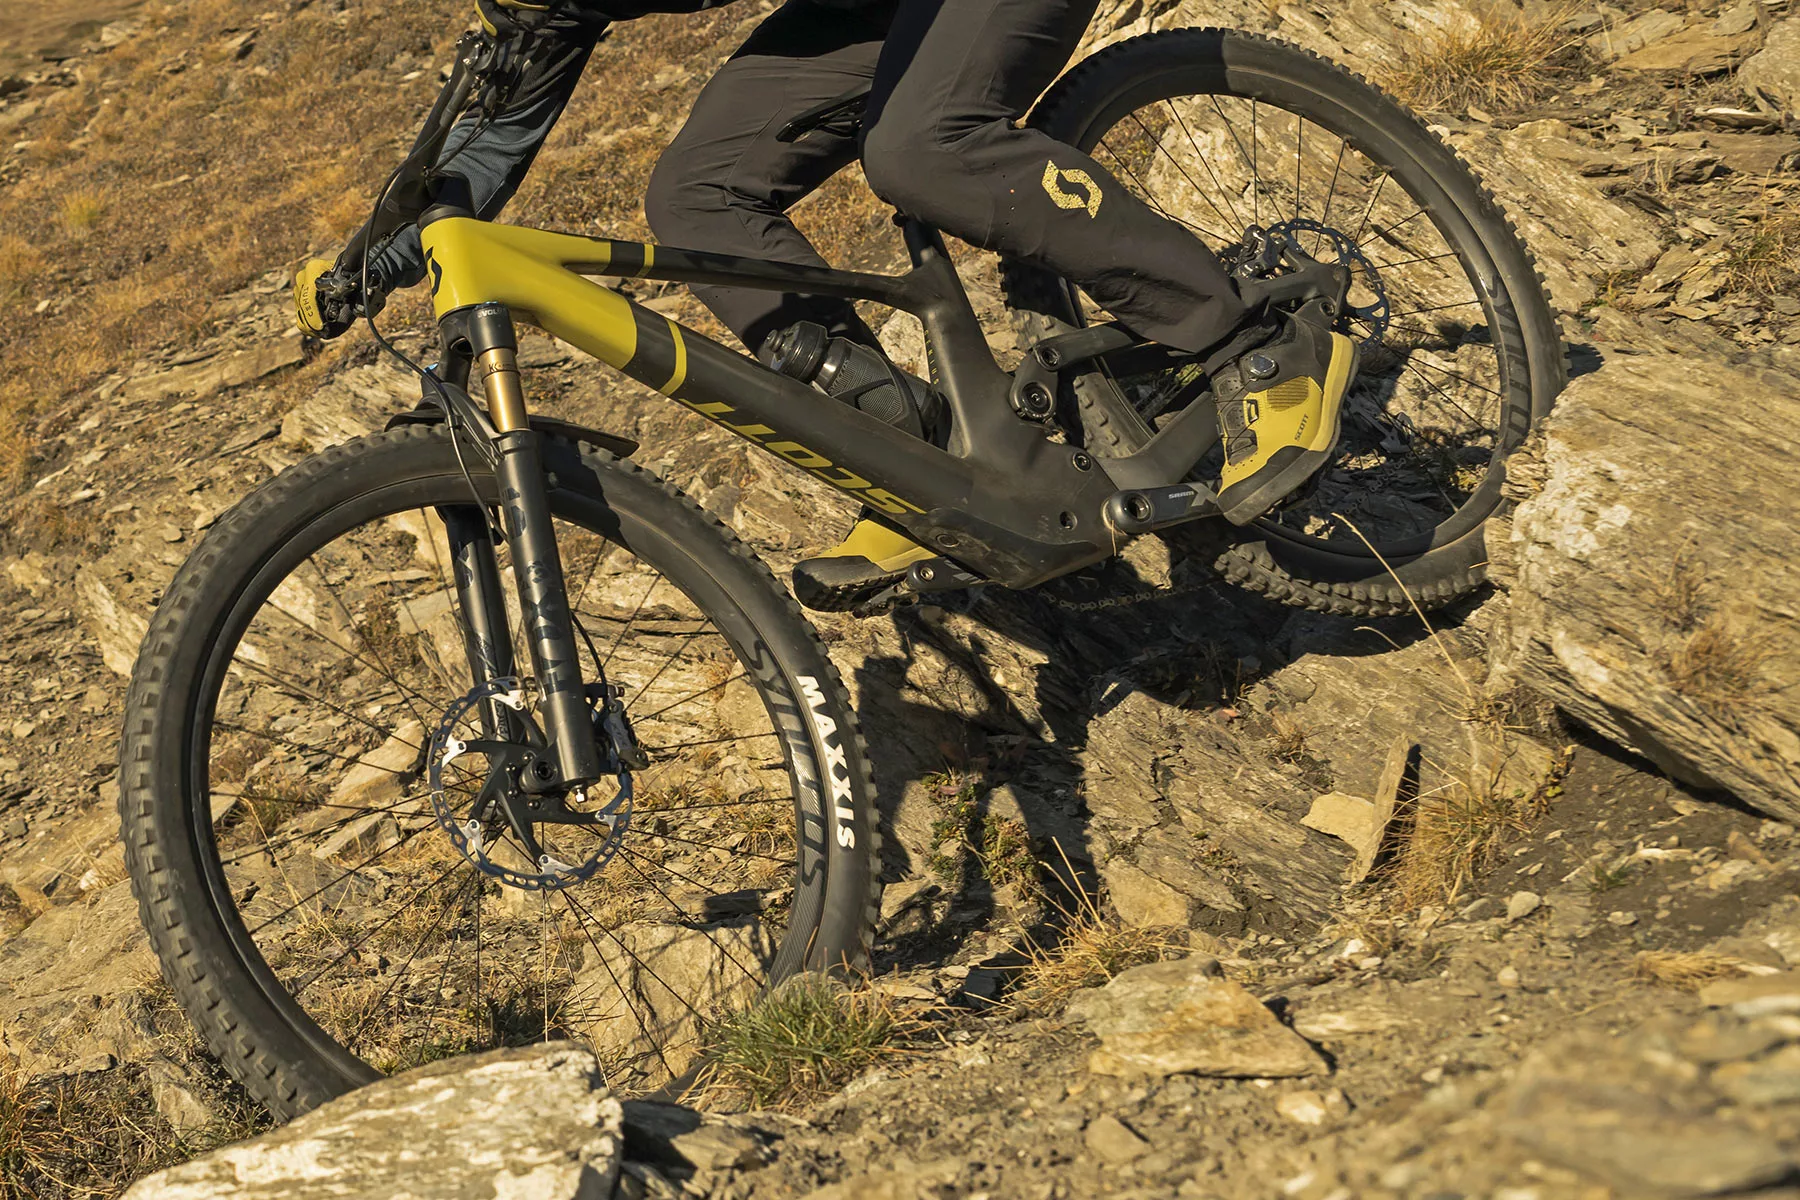 Syncros Revelstoke lightweight carbon all-mountain trail enduro MTB wheels, ride photo by Roo Fowler